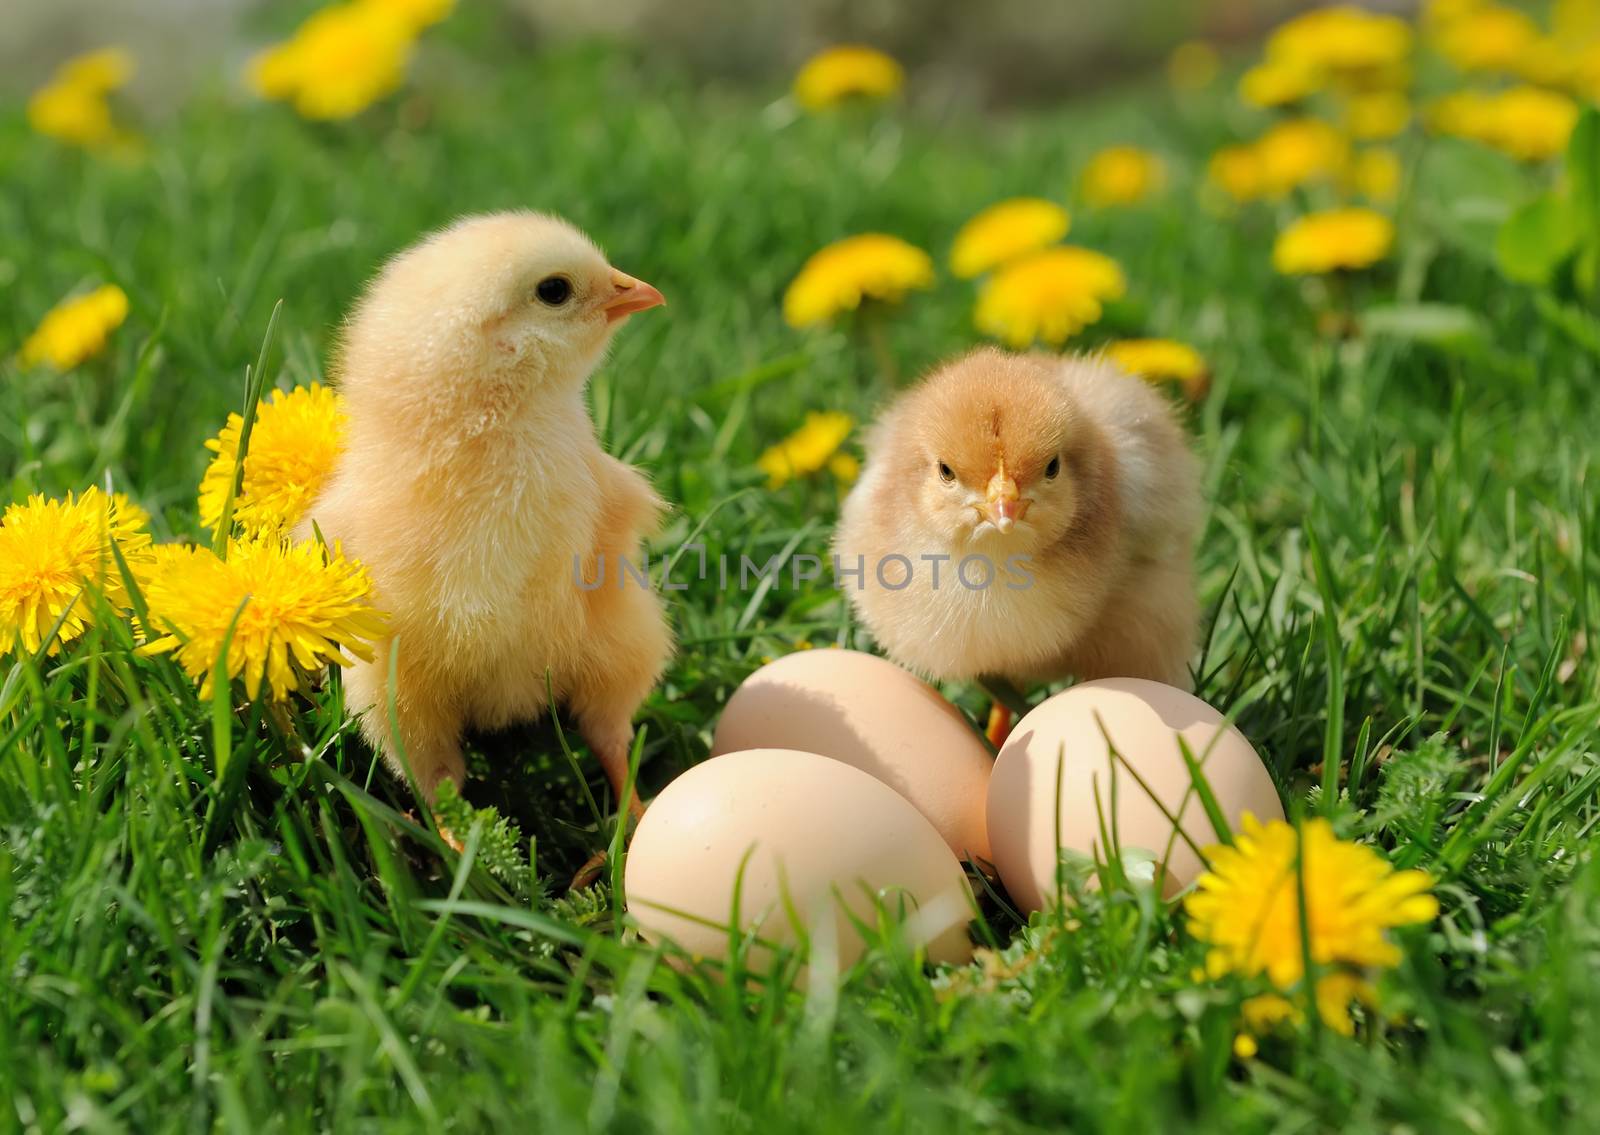 Little chicken and egg in the grass on a farm